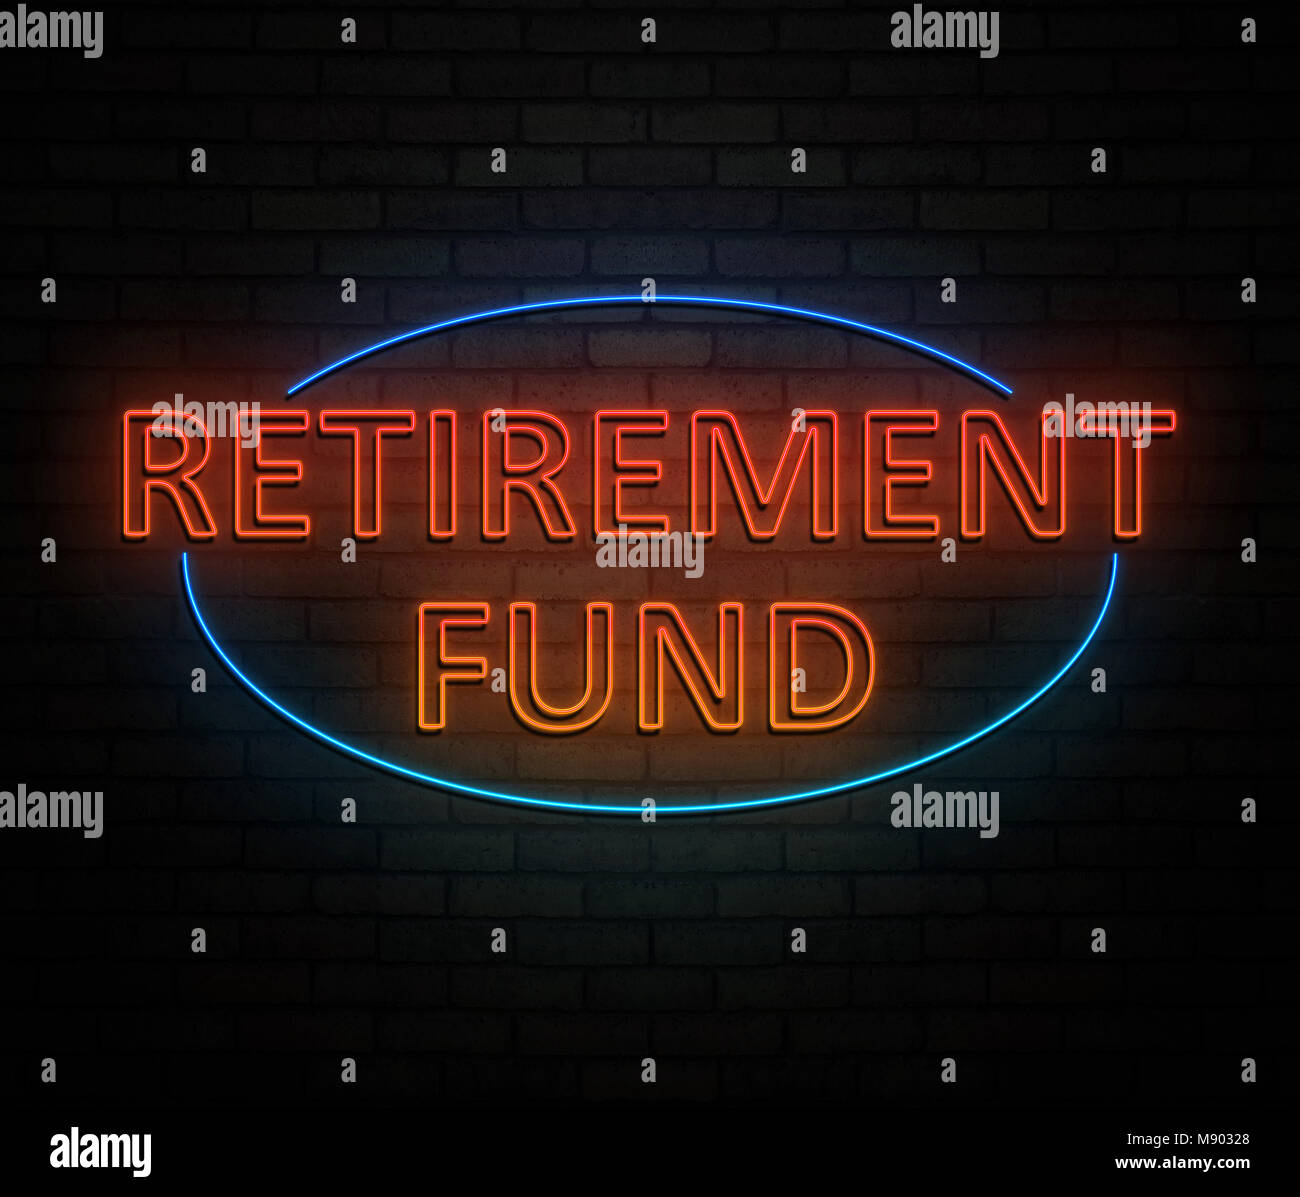 3d Illustration depicting an illuminated neon sign with a retirement fund concept. Stock Photo